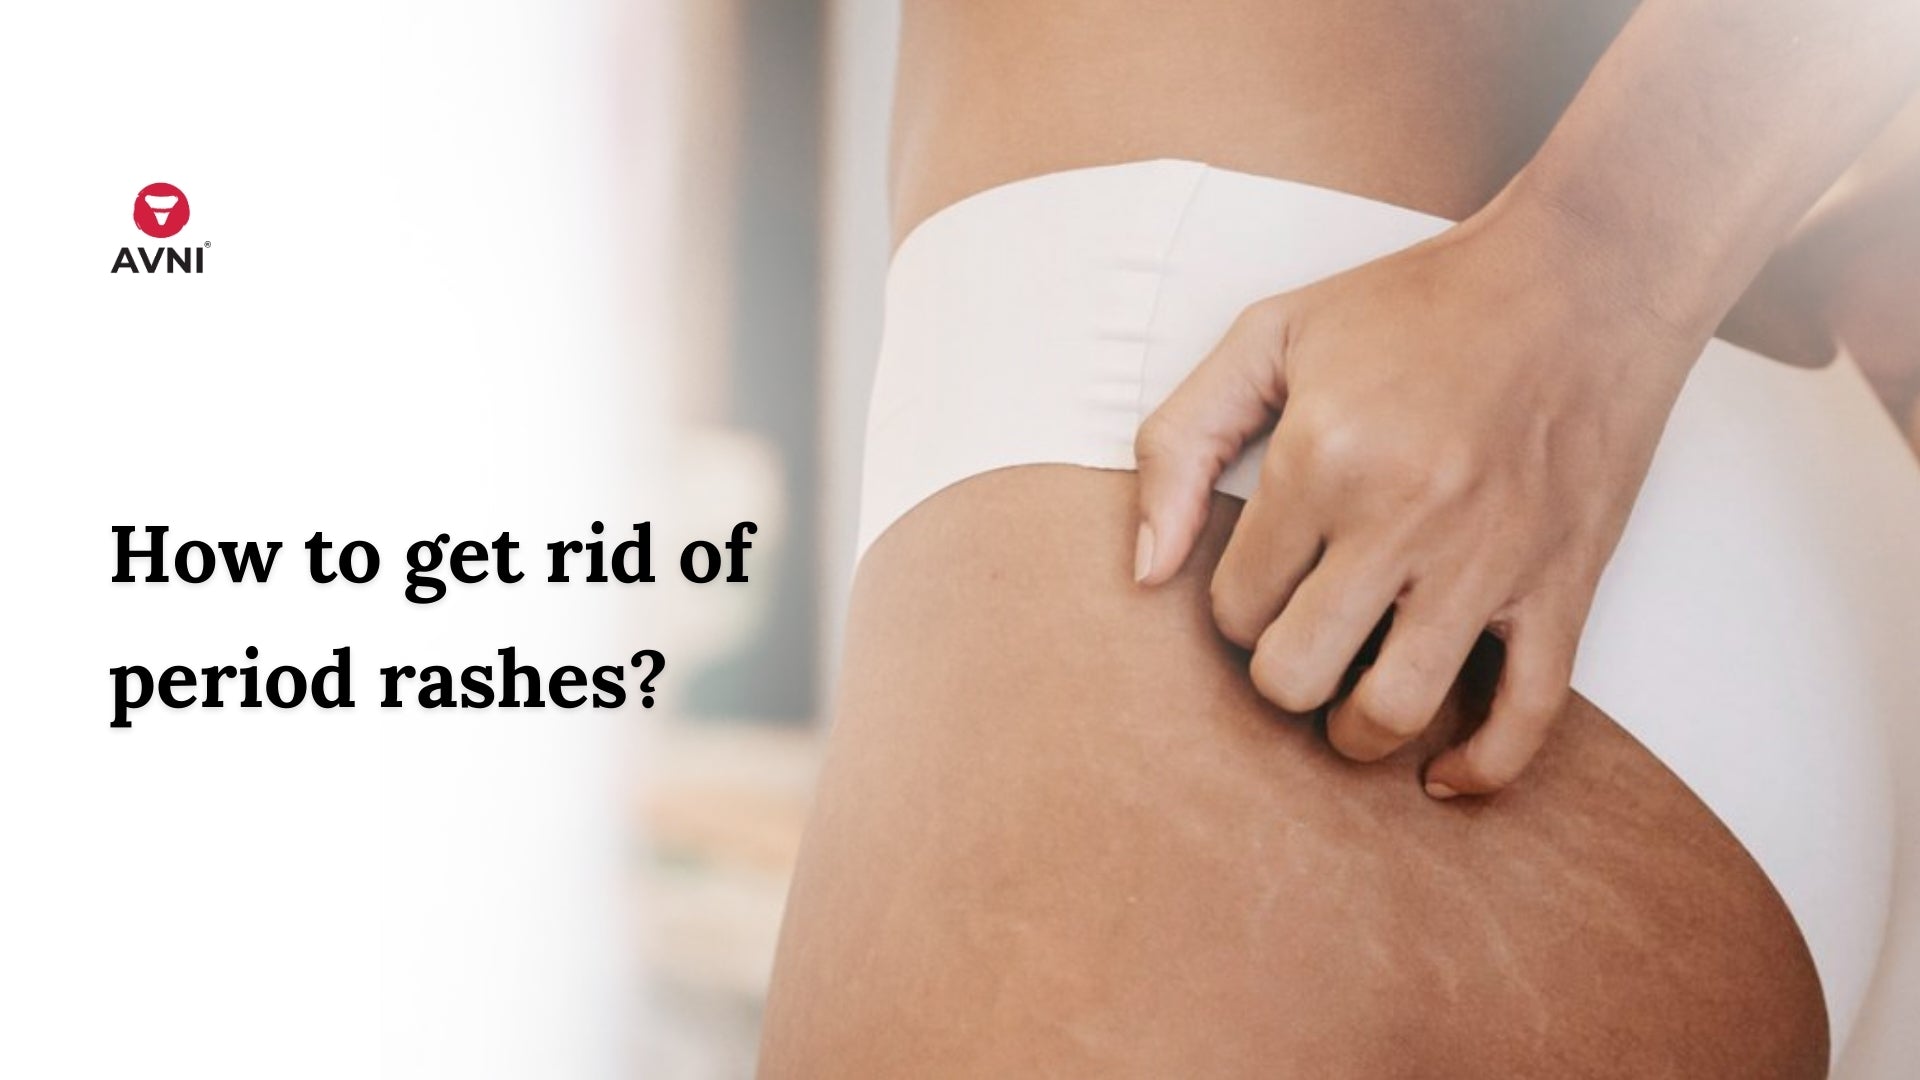 Pad rash: Appearance, causes, treatment, and more